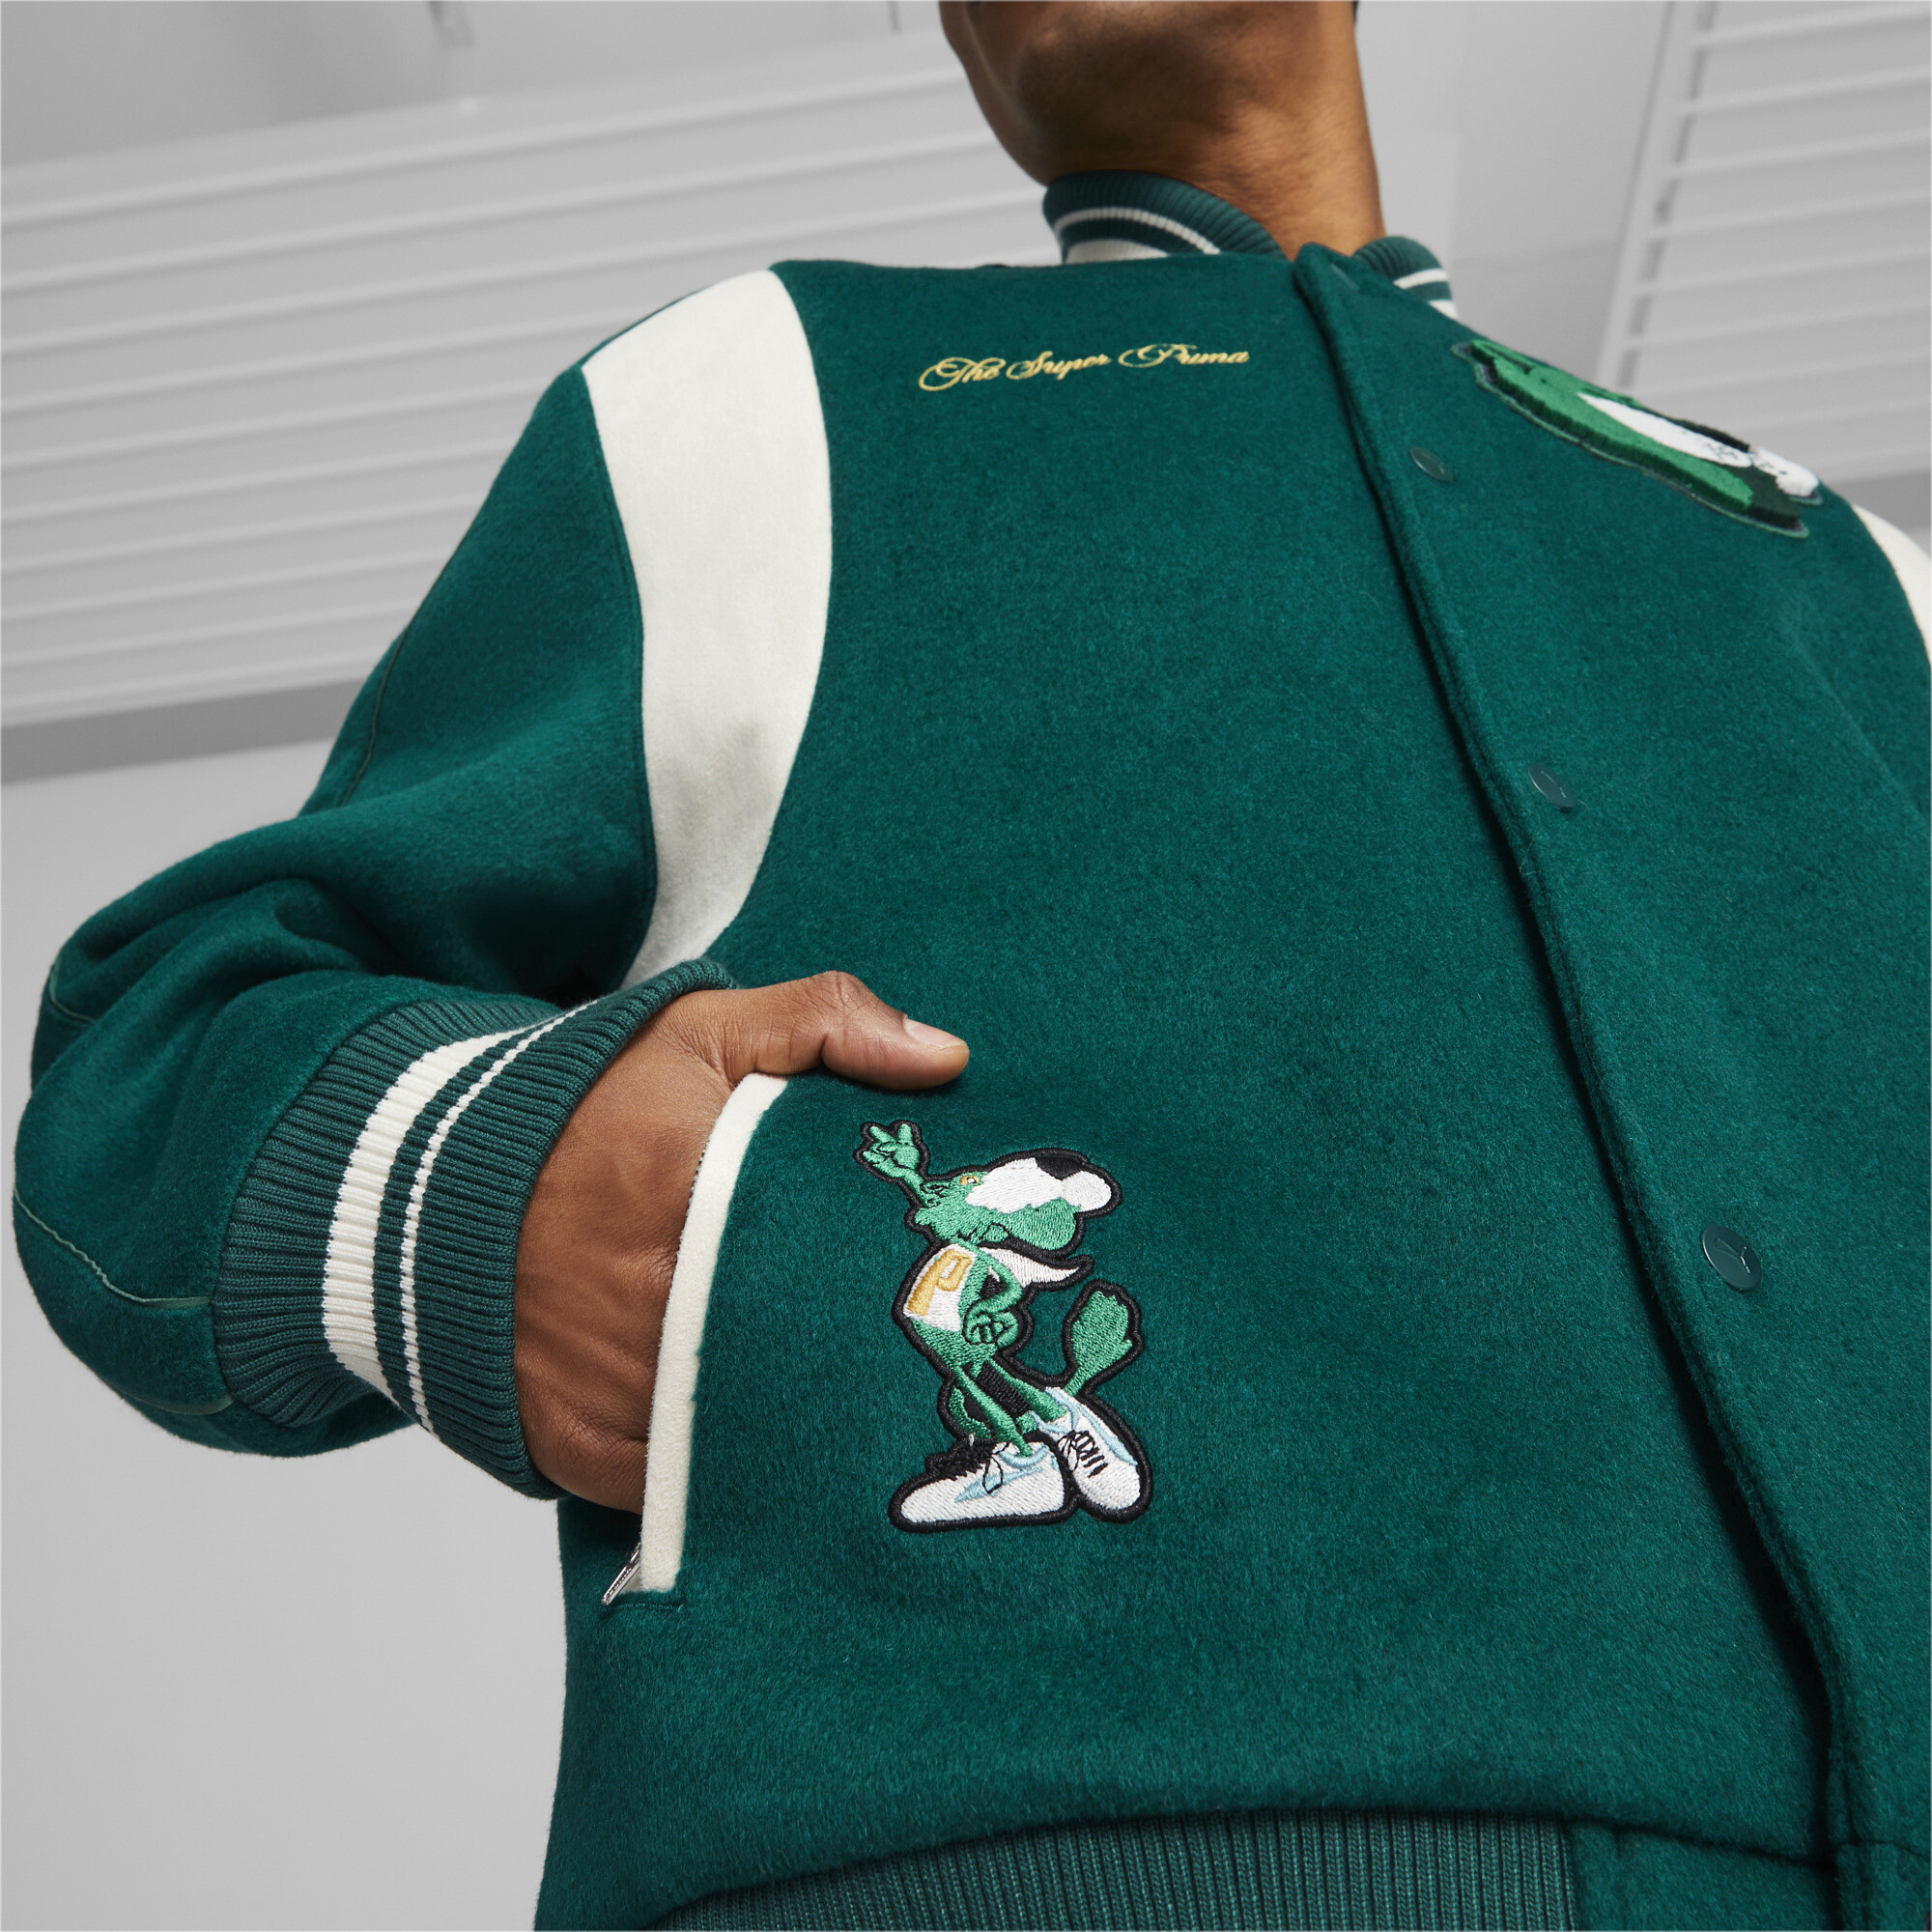 Men's PUMA The Mascot T7 College Jacket Men In Green, Size Large